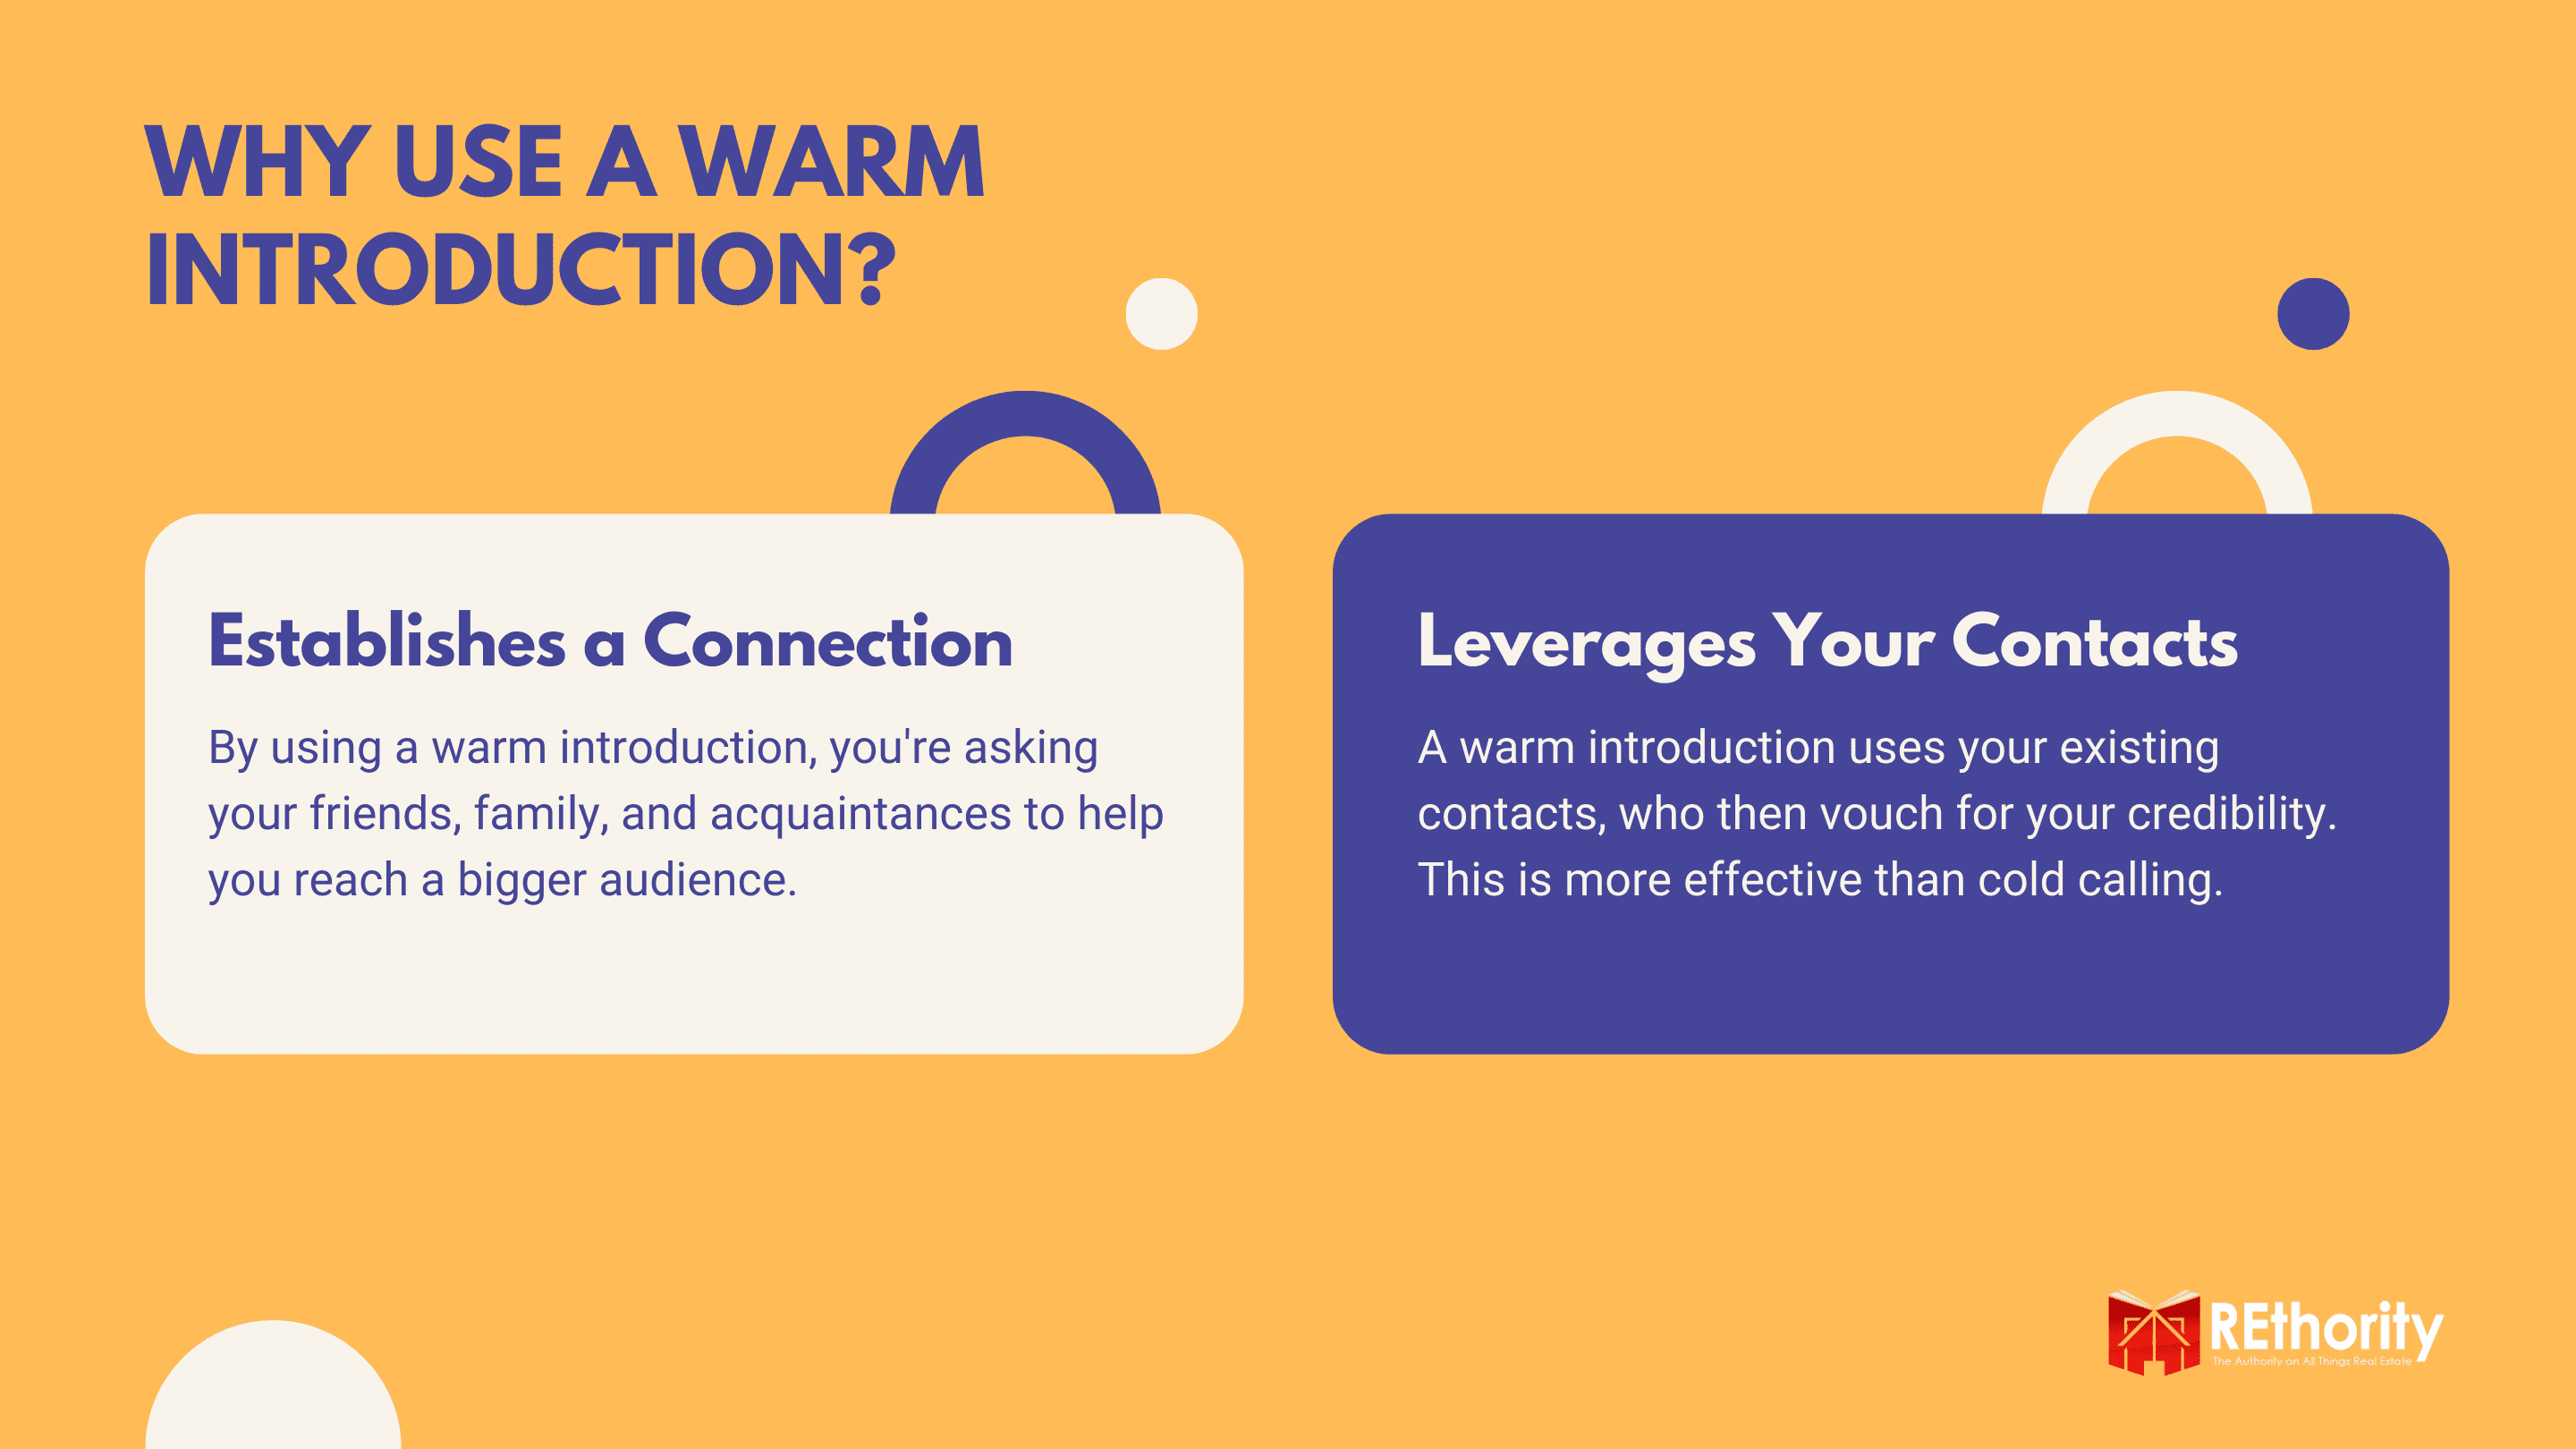 Why Use a Warm Introduction graphic explaining the two main reasons to use one.